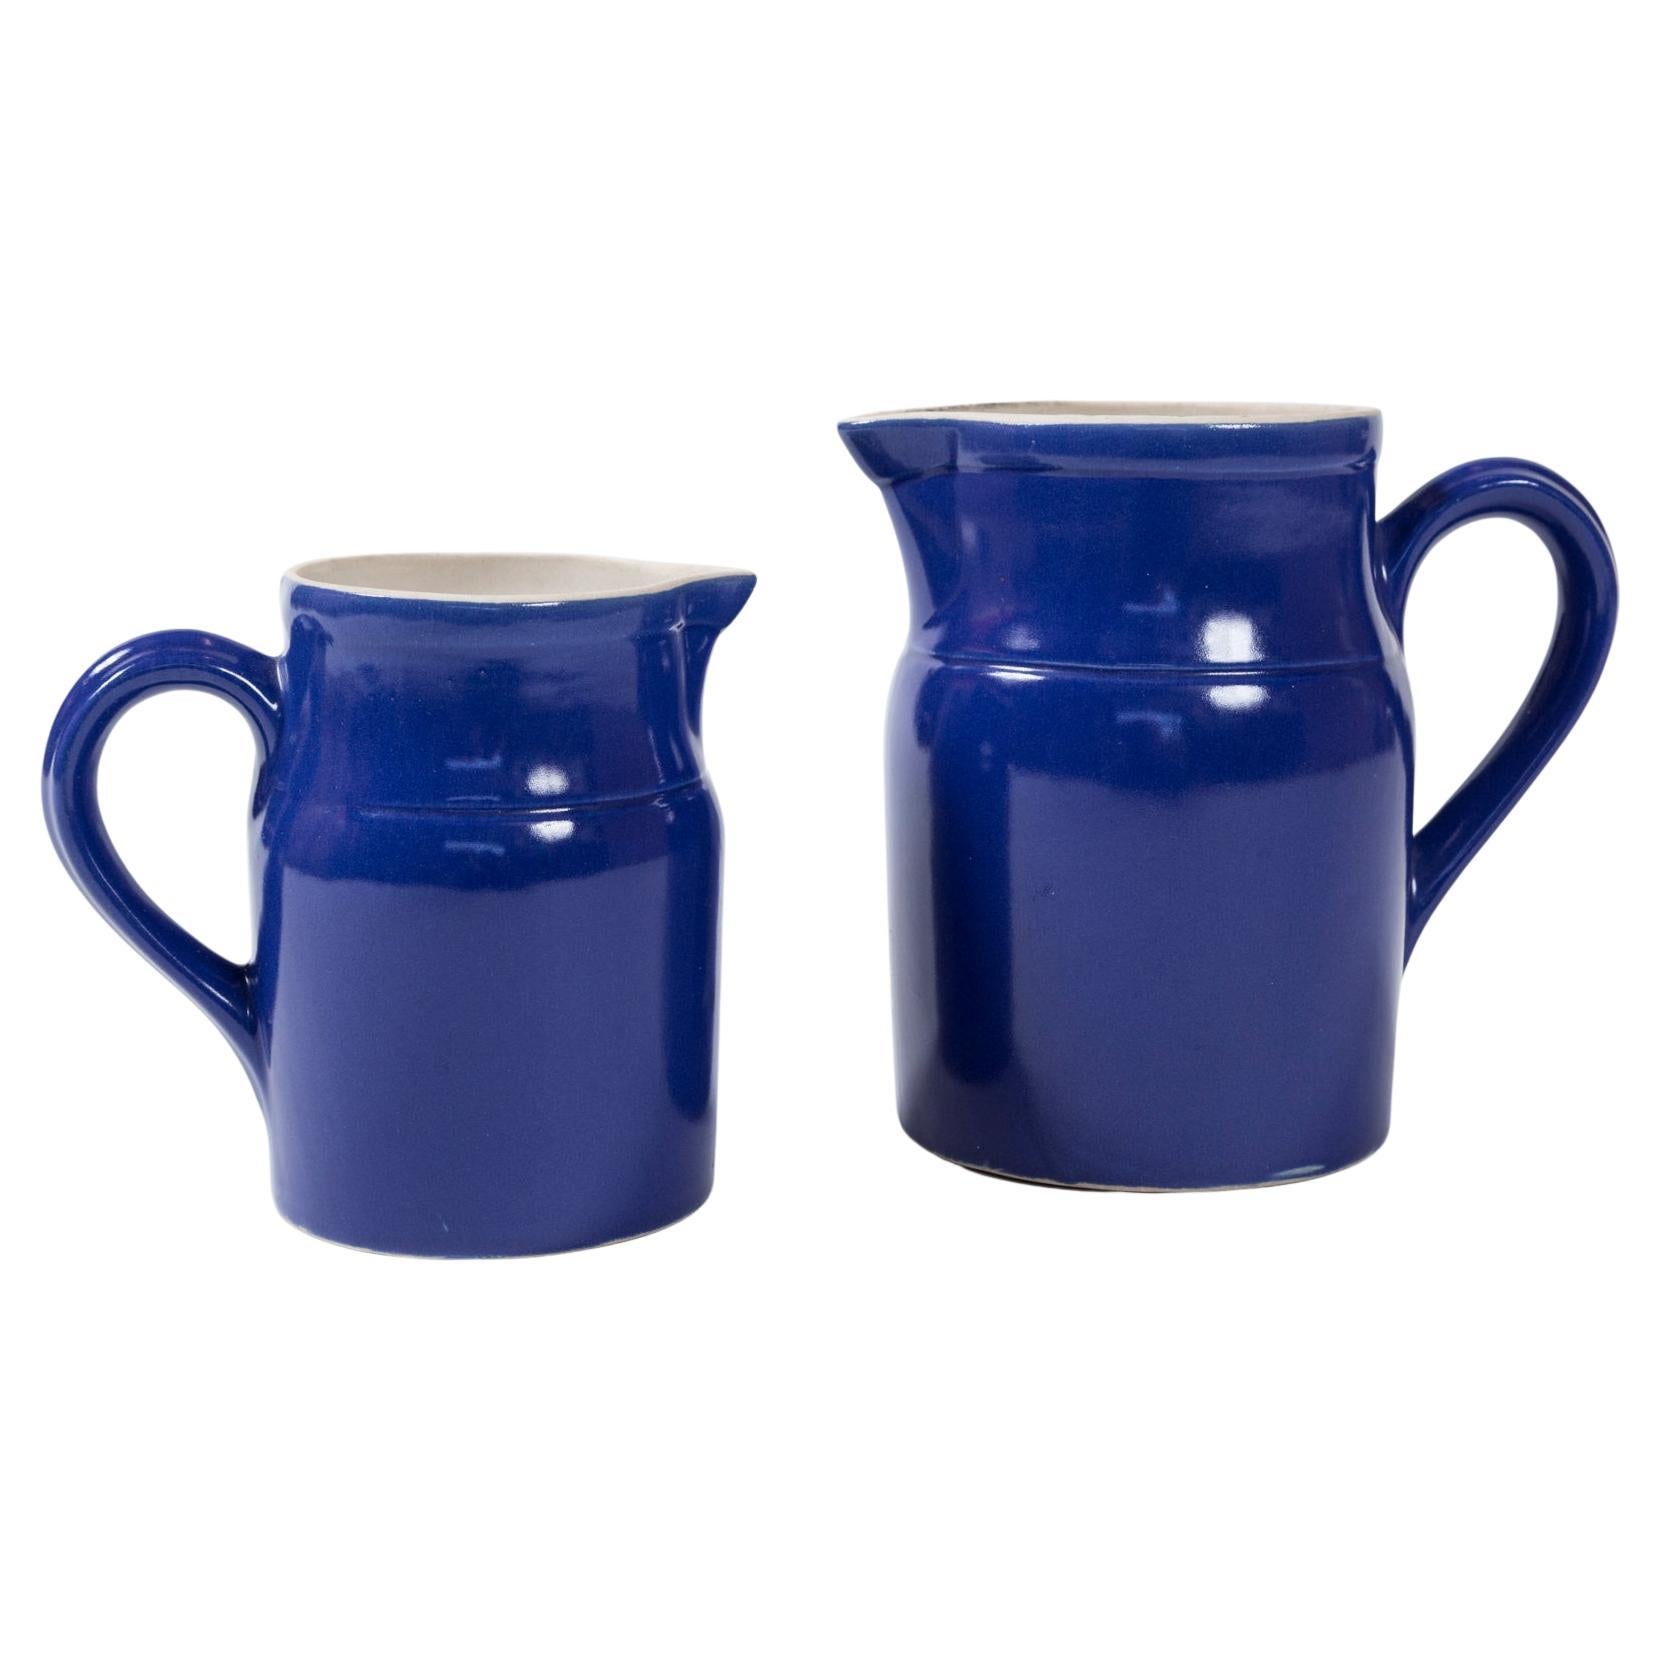 Two Vintage Ceramic Dairy Pitchers, Digoin, France, circa 1960's